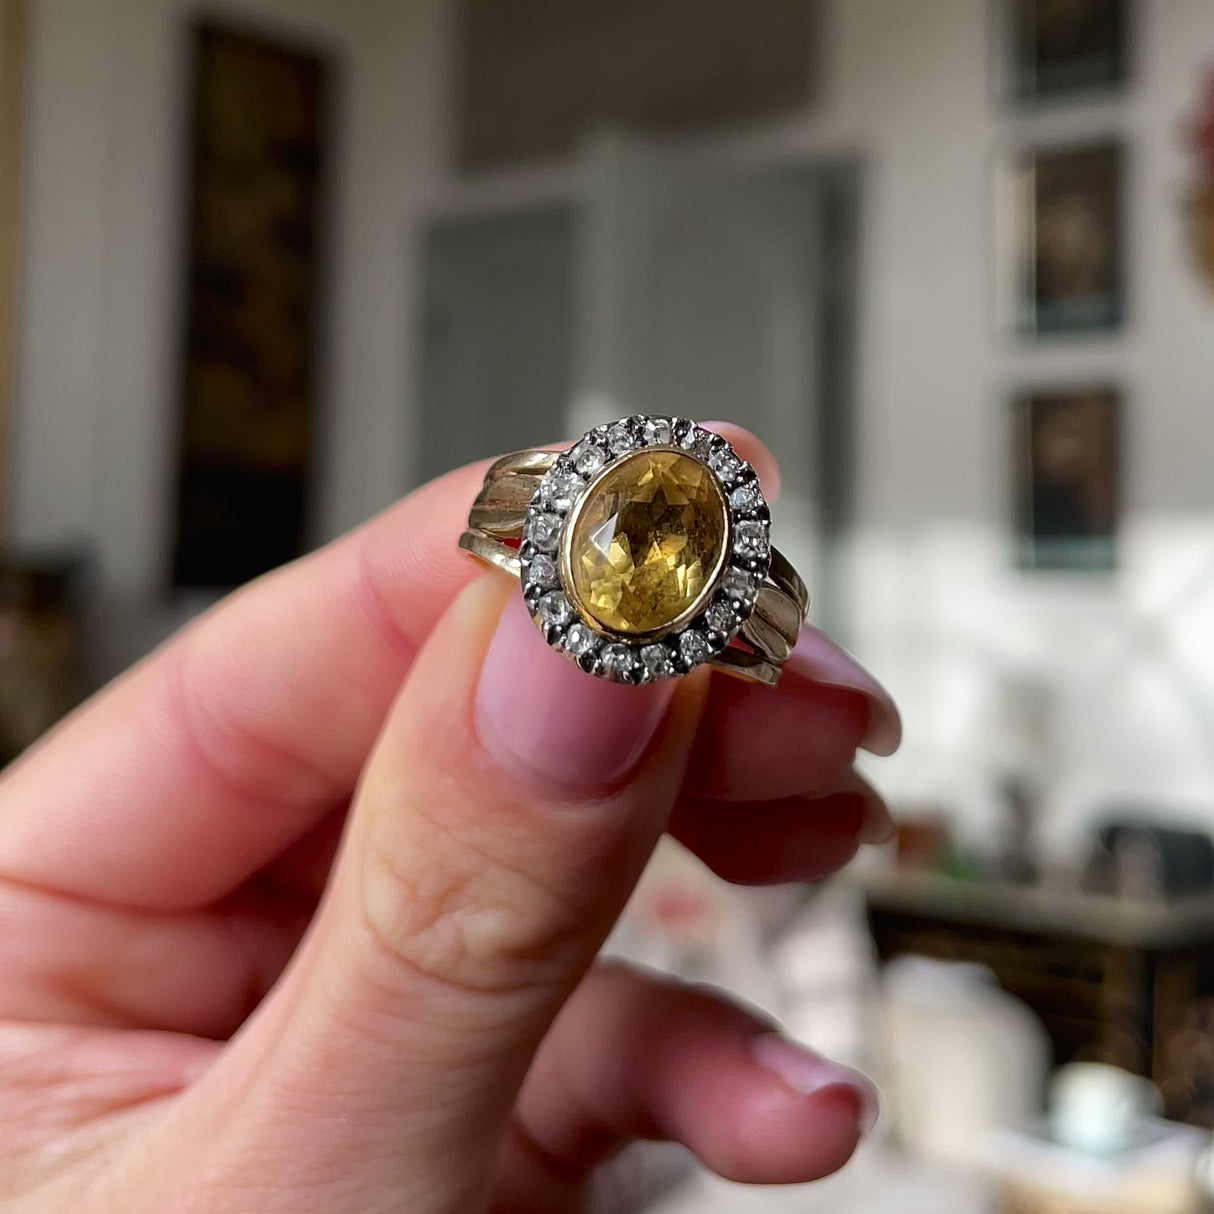 Antique Georgian citrine and diamond cluster ring, held in fingers and rotated to give perspective.